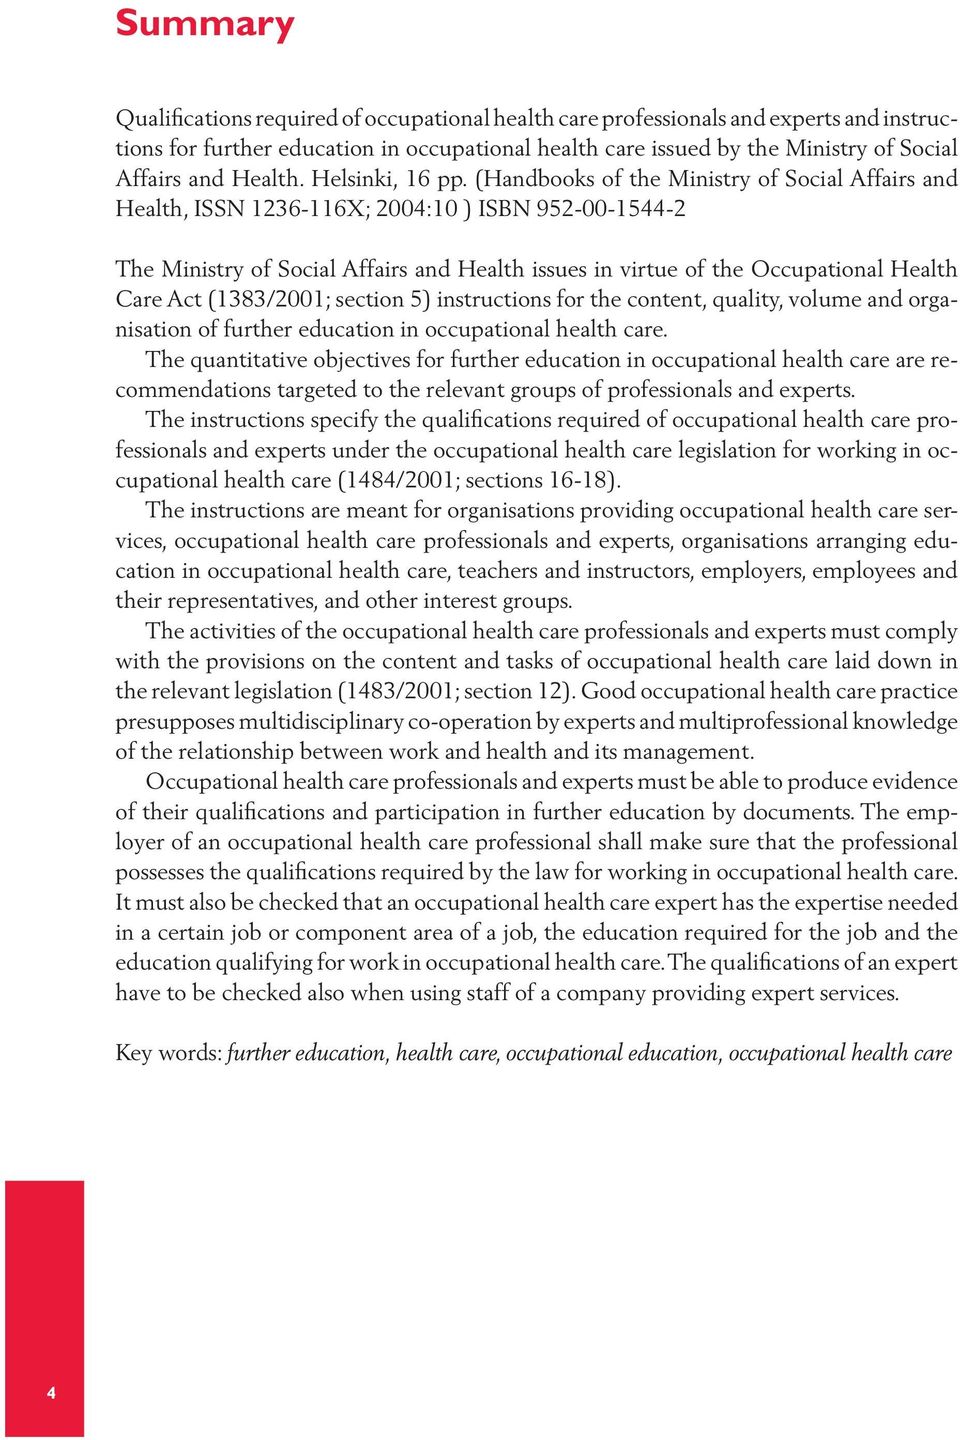 (Handbooks of the Ministry of Social Affairs and Health, ISSN 1236-116X; 2004:10 ) ISBN 952-00-1544-2 The Ministry of Social Affairs and Health issues in virtue of the Occupational Health Care Act